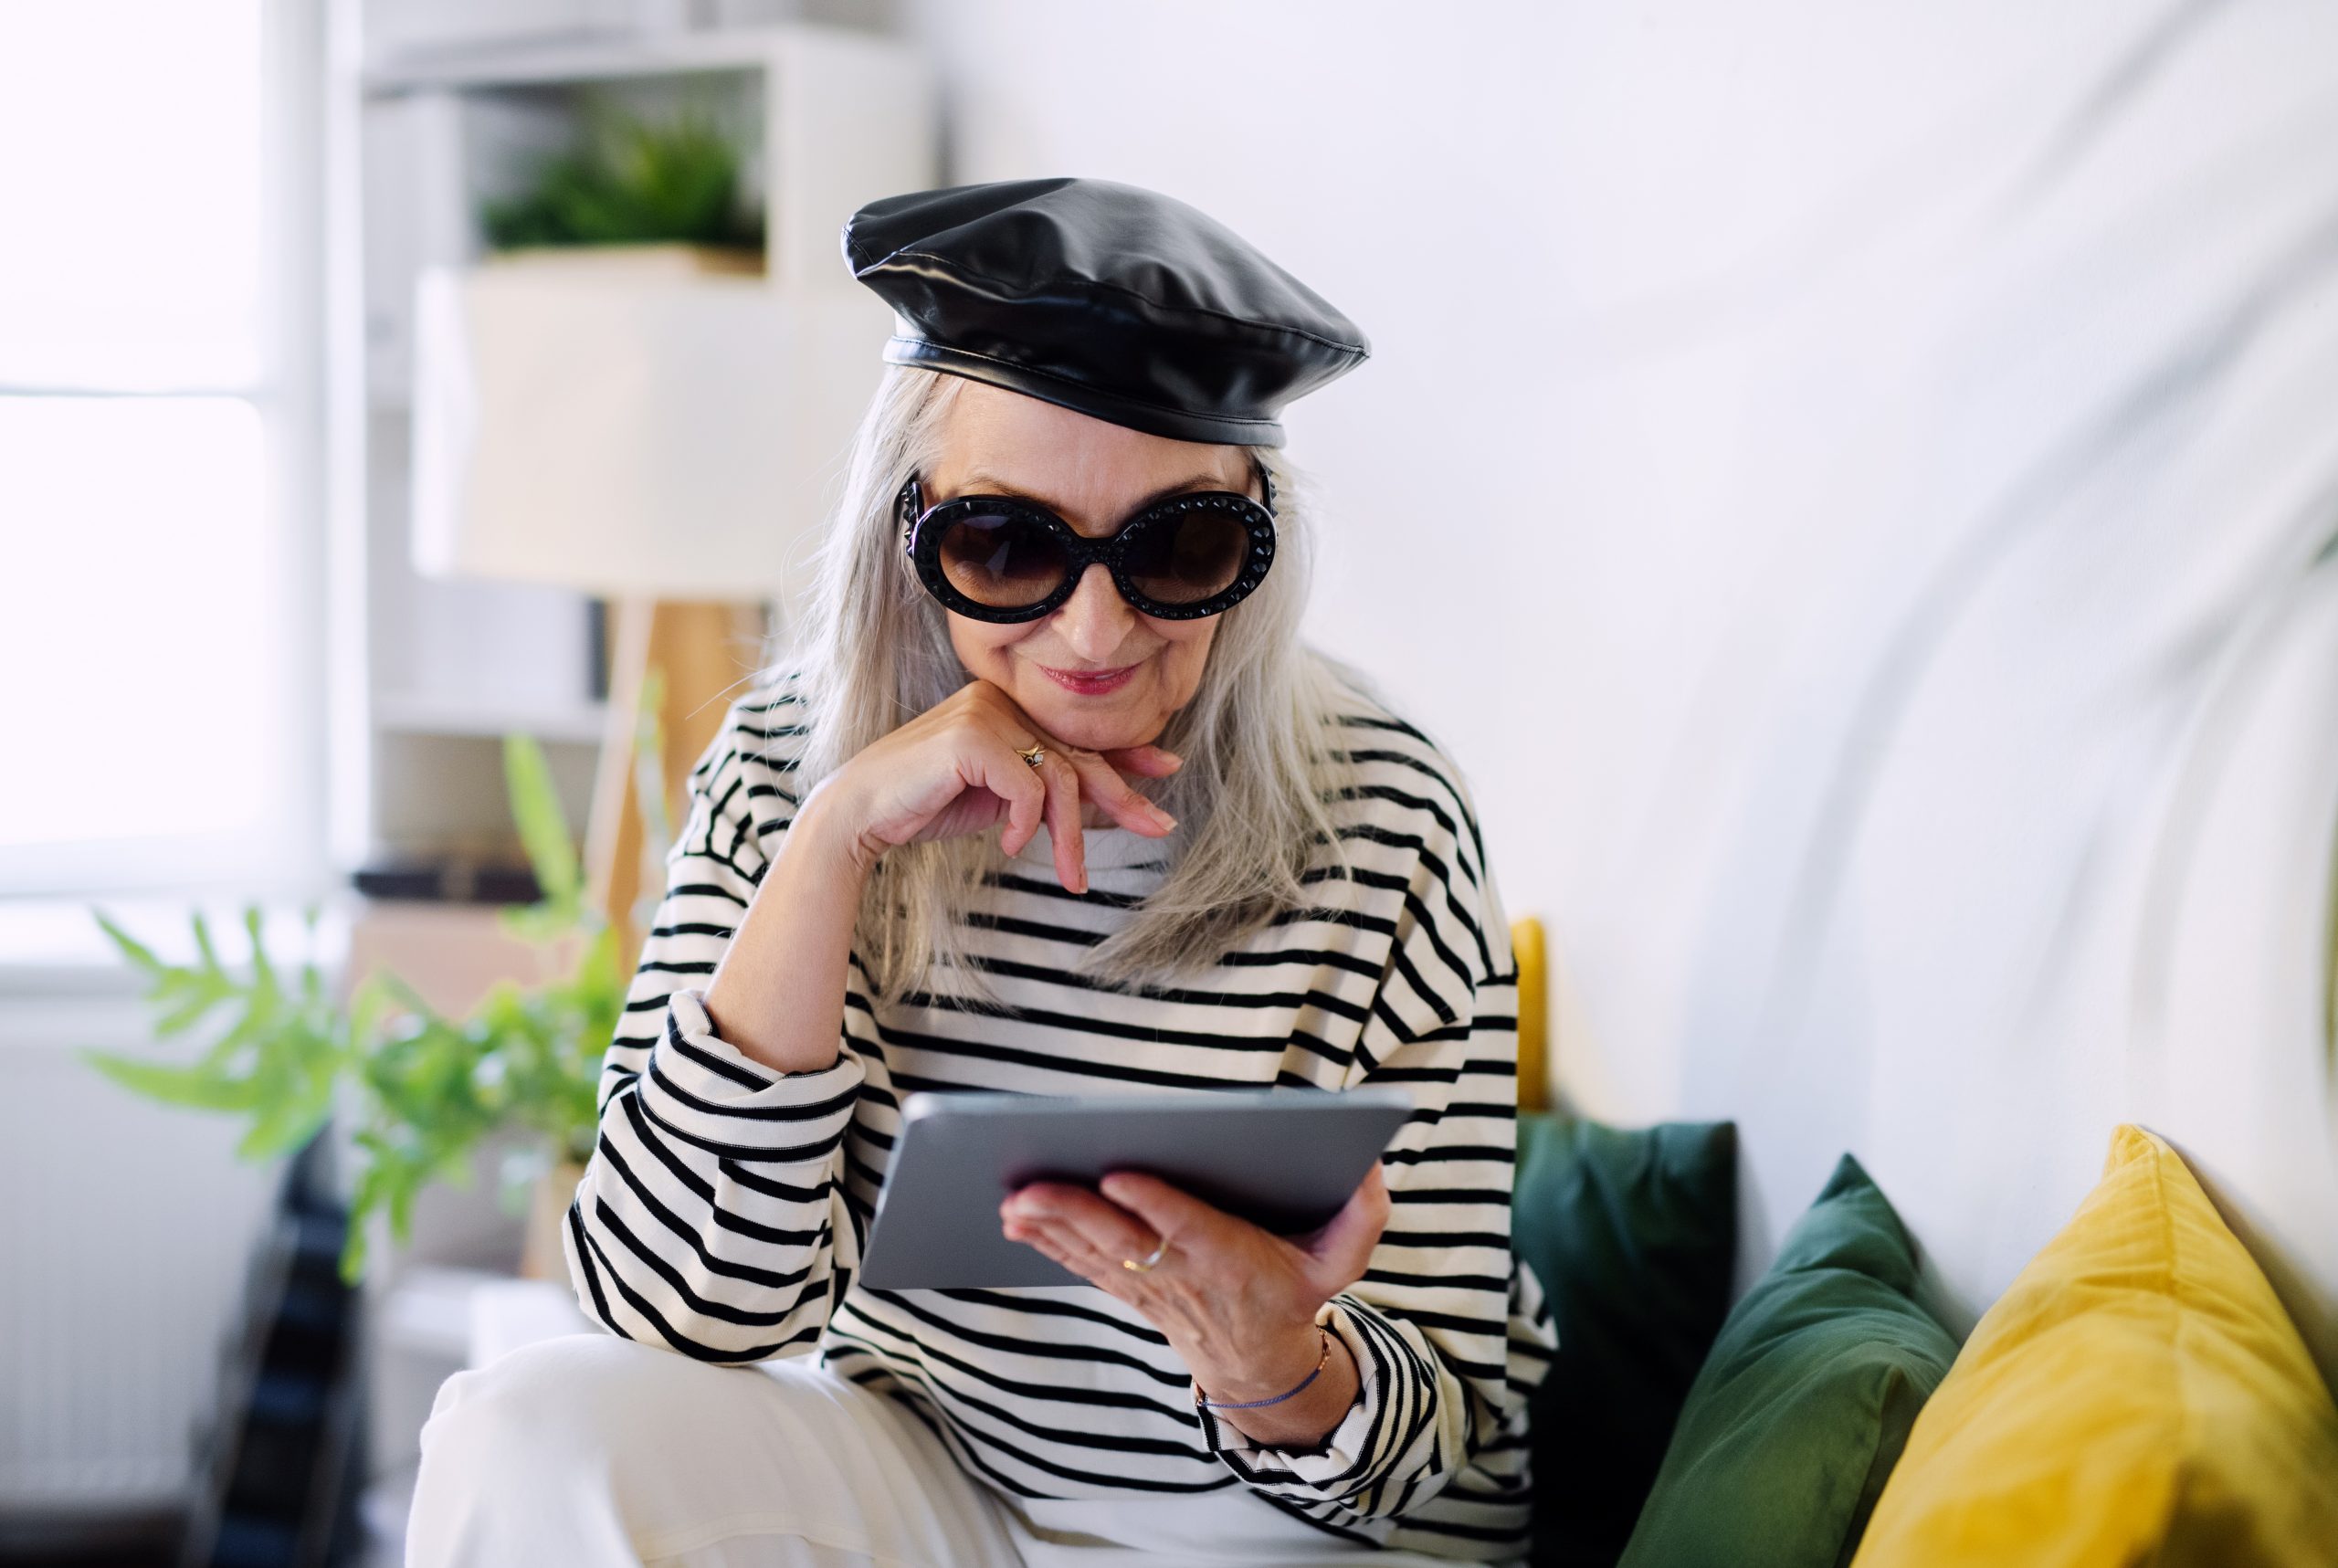 An older adult in a beret and black and white striped shirt looks at her tablet computer